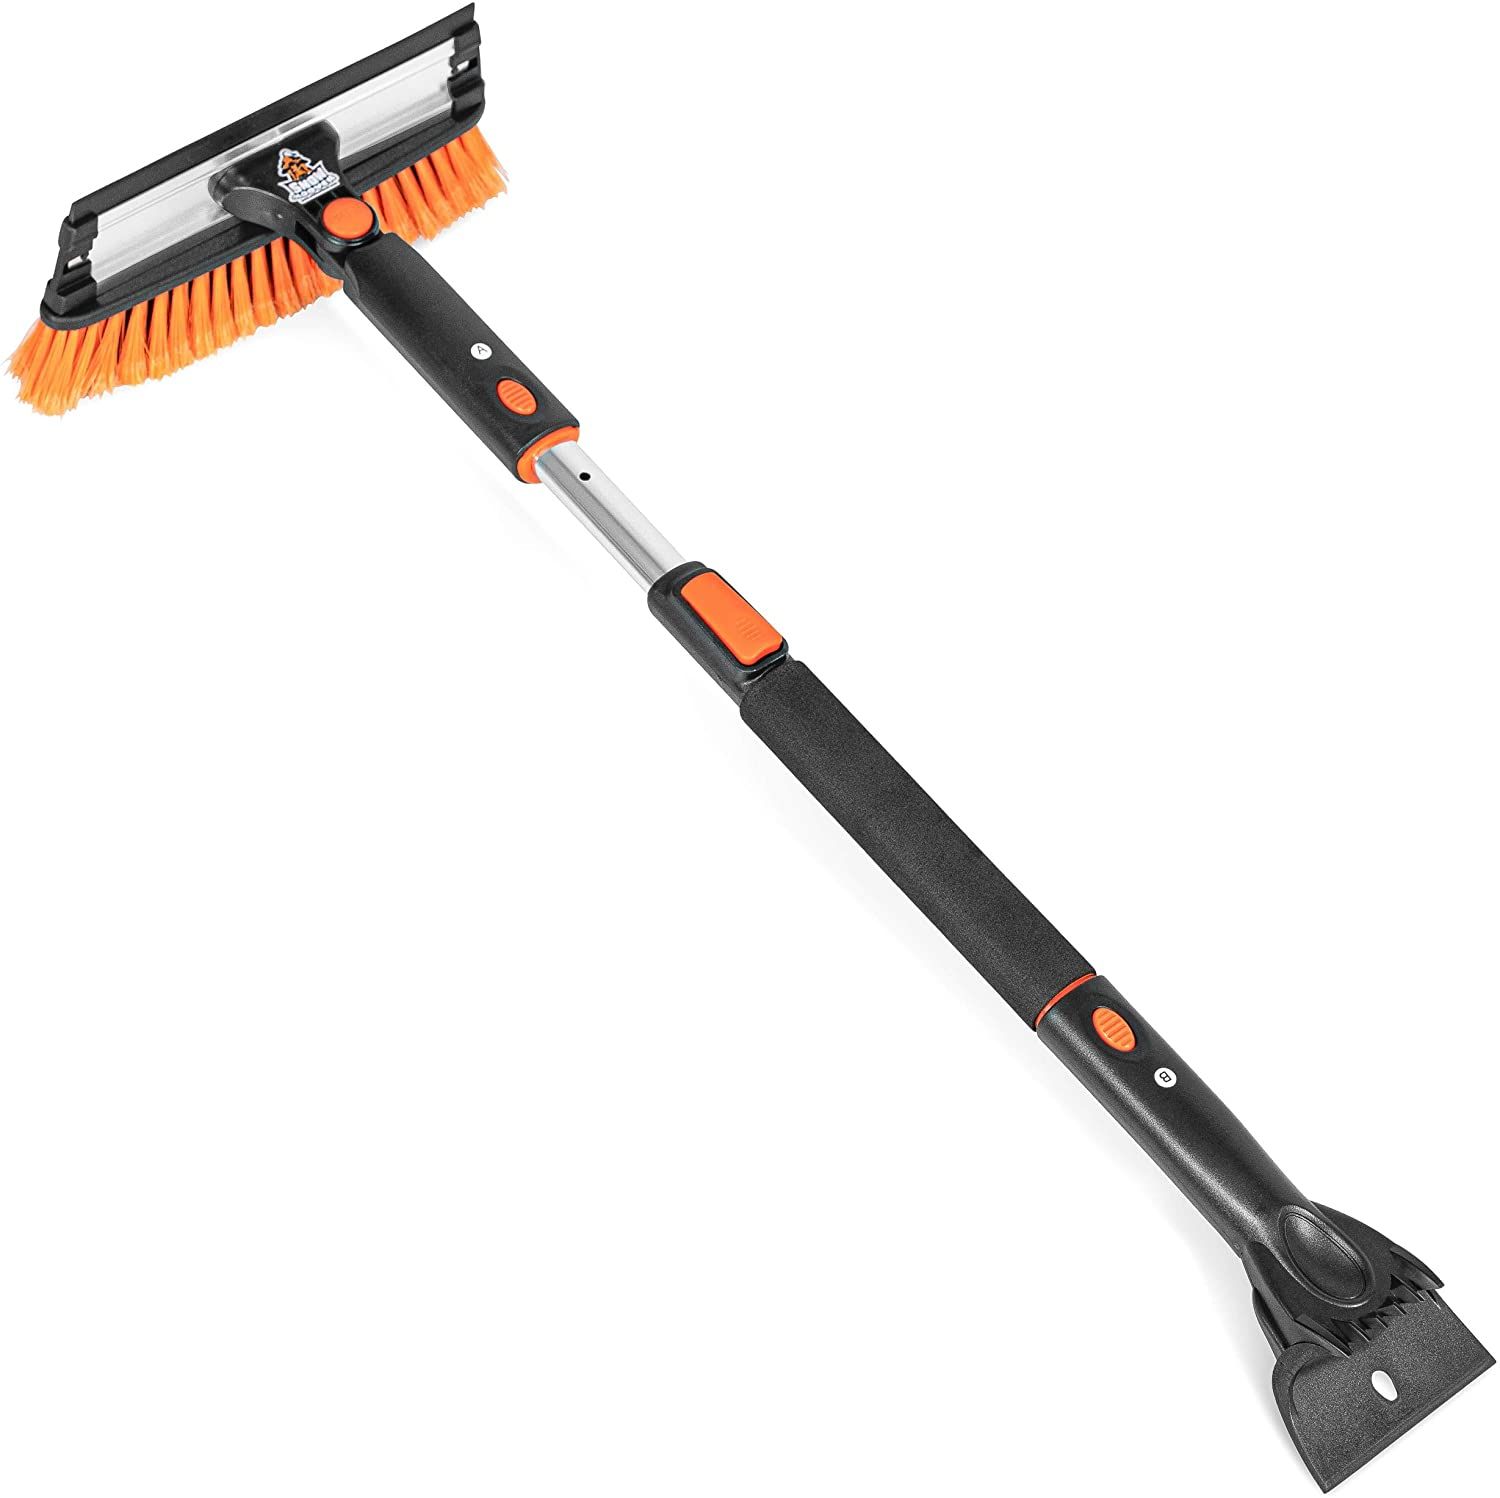 Snow Moover 39 Extendable Snow Brush with Squeegee &amp; Ice Scraper